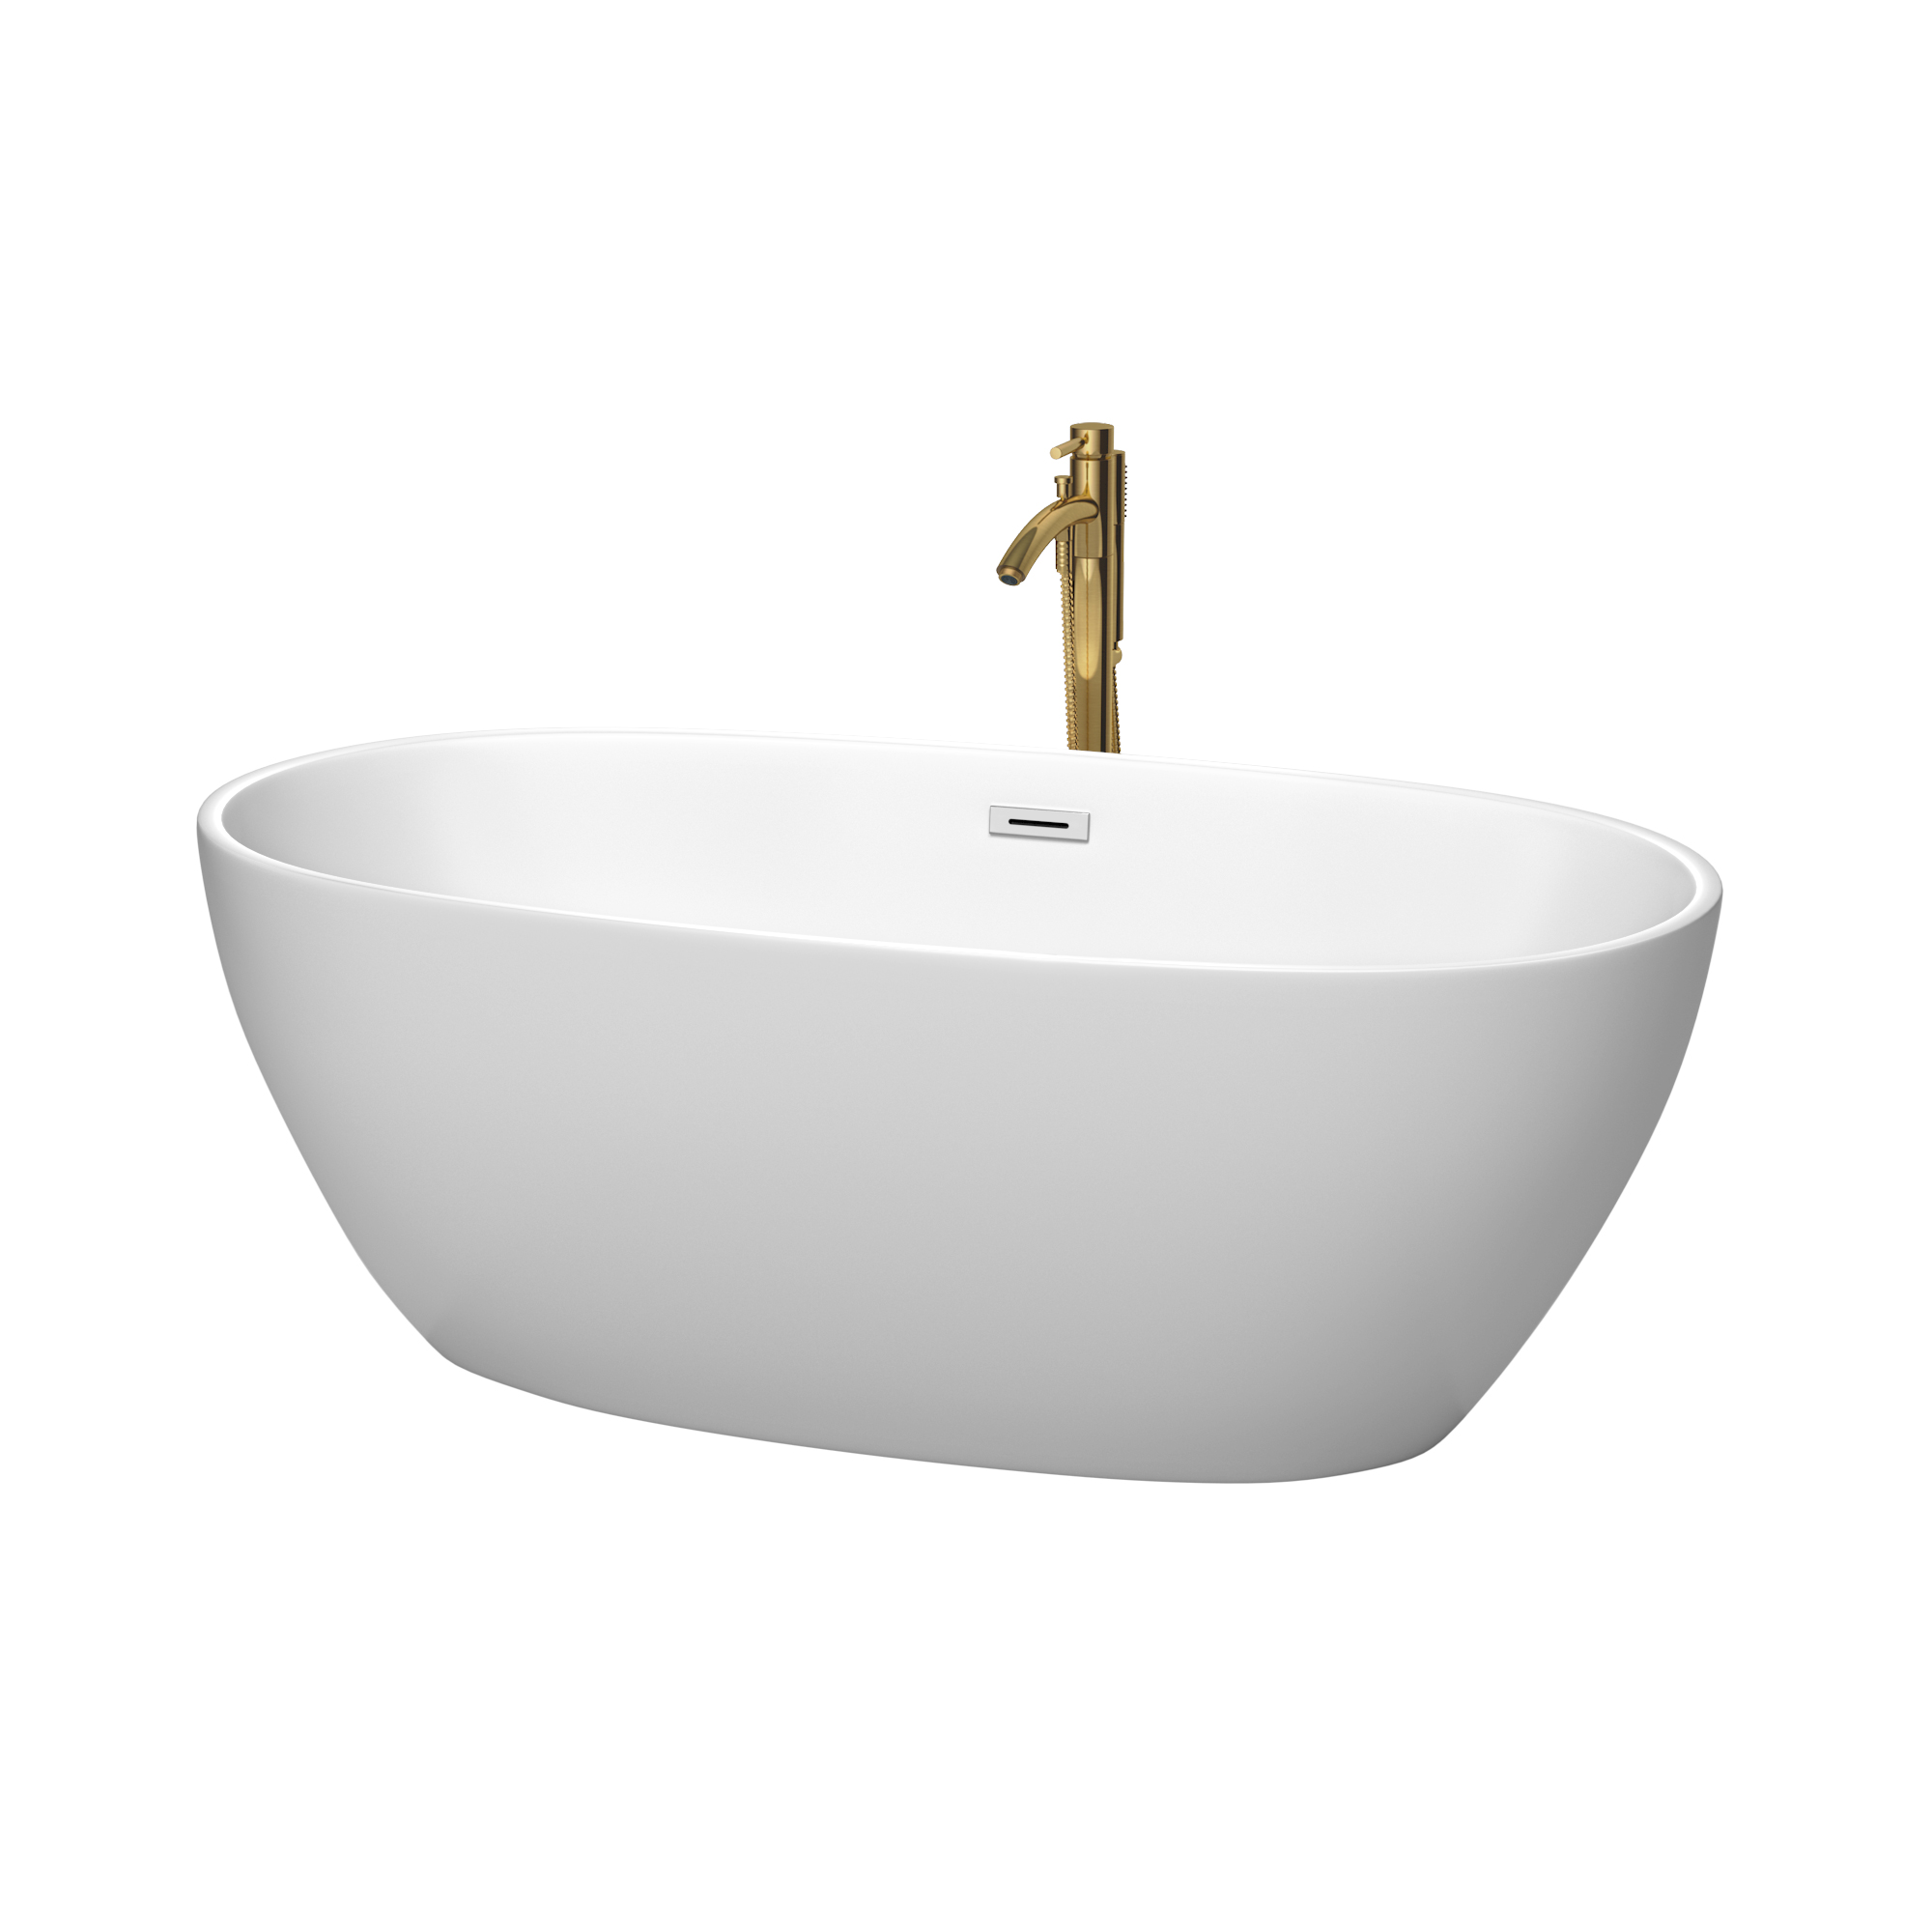 63" Freestanding Bathtub in Matte White with Polished Chrome Trim and Floor Mounted Faucet in Brushed Gold